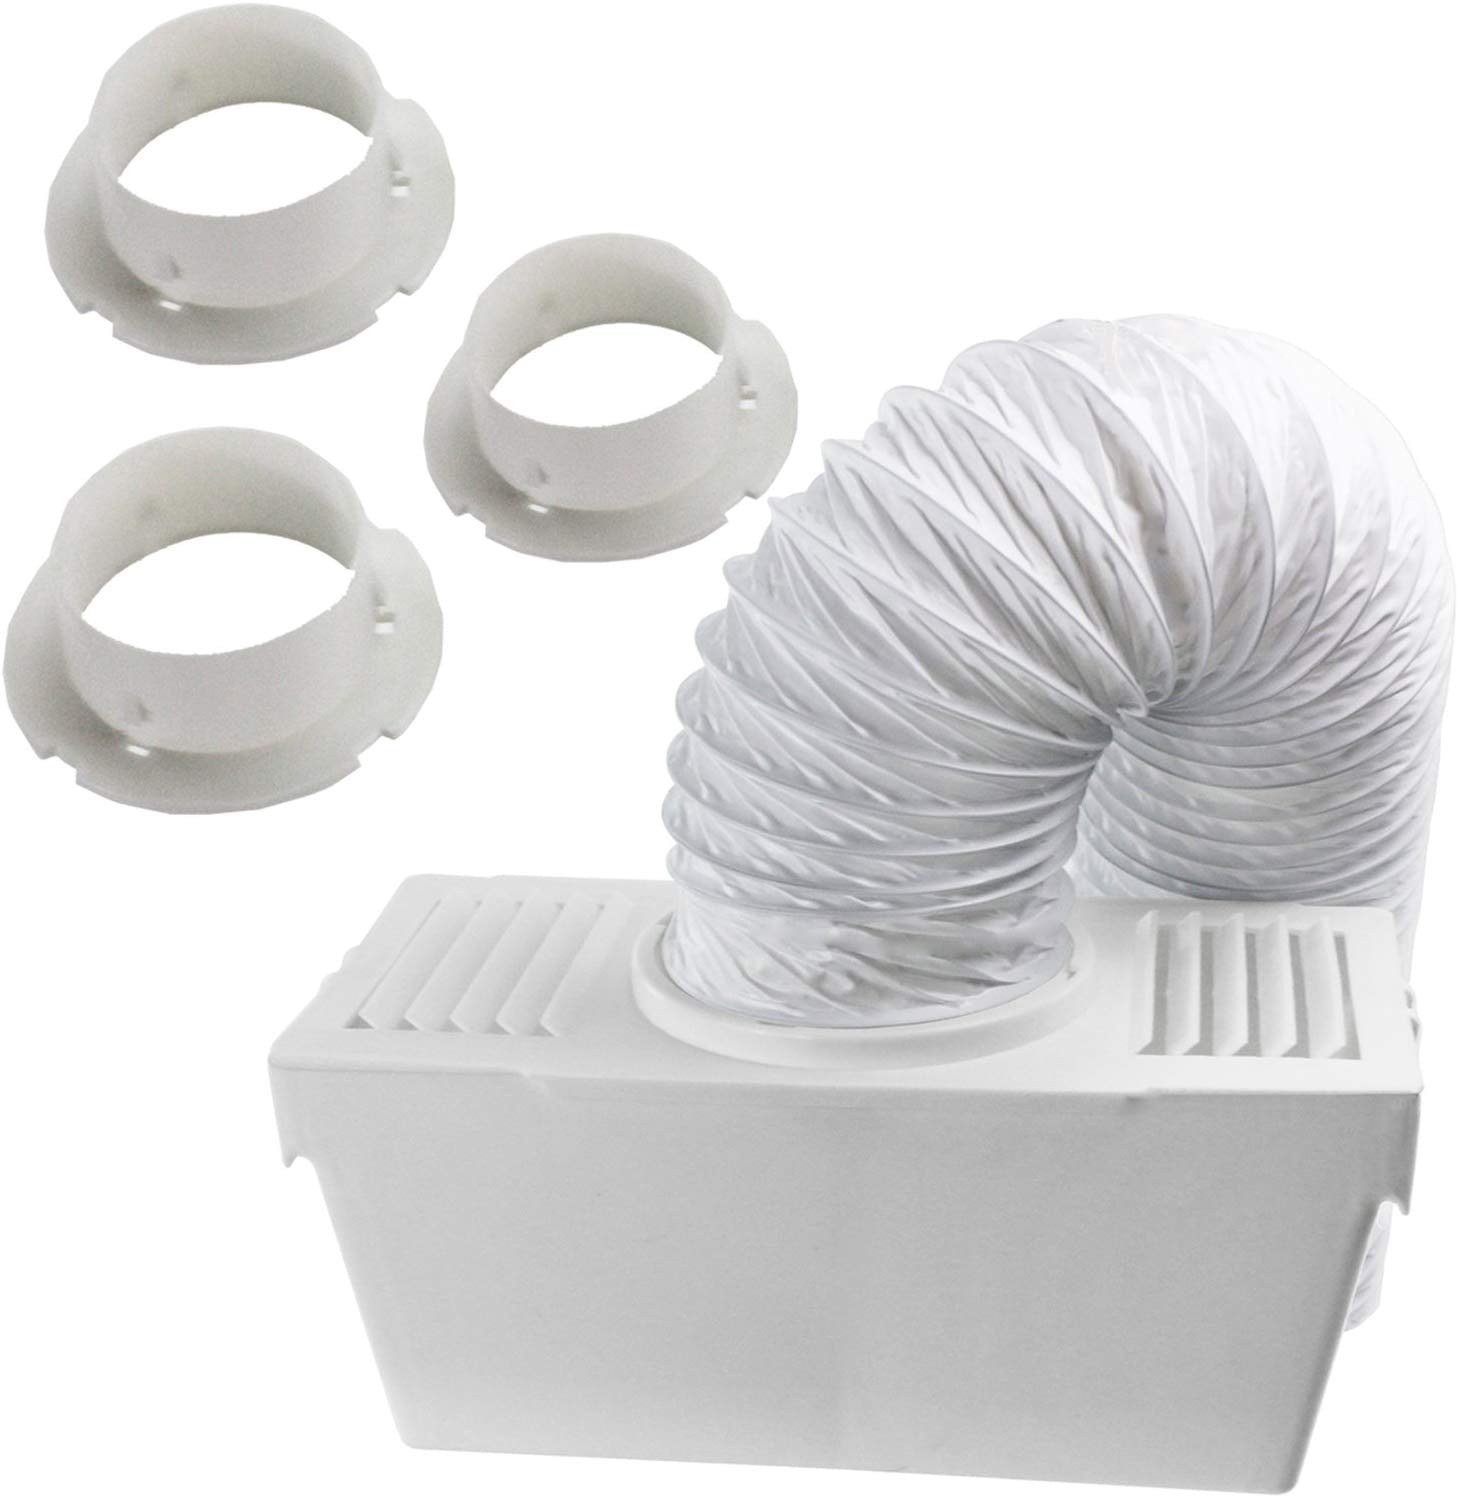 Vent Hose Condenser Kit with 3 x Adapters for Hoover Tumble Dryer (1.2m)